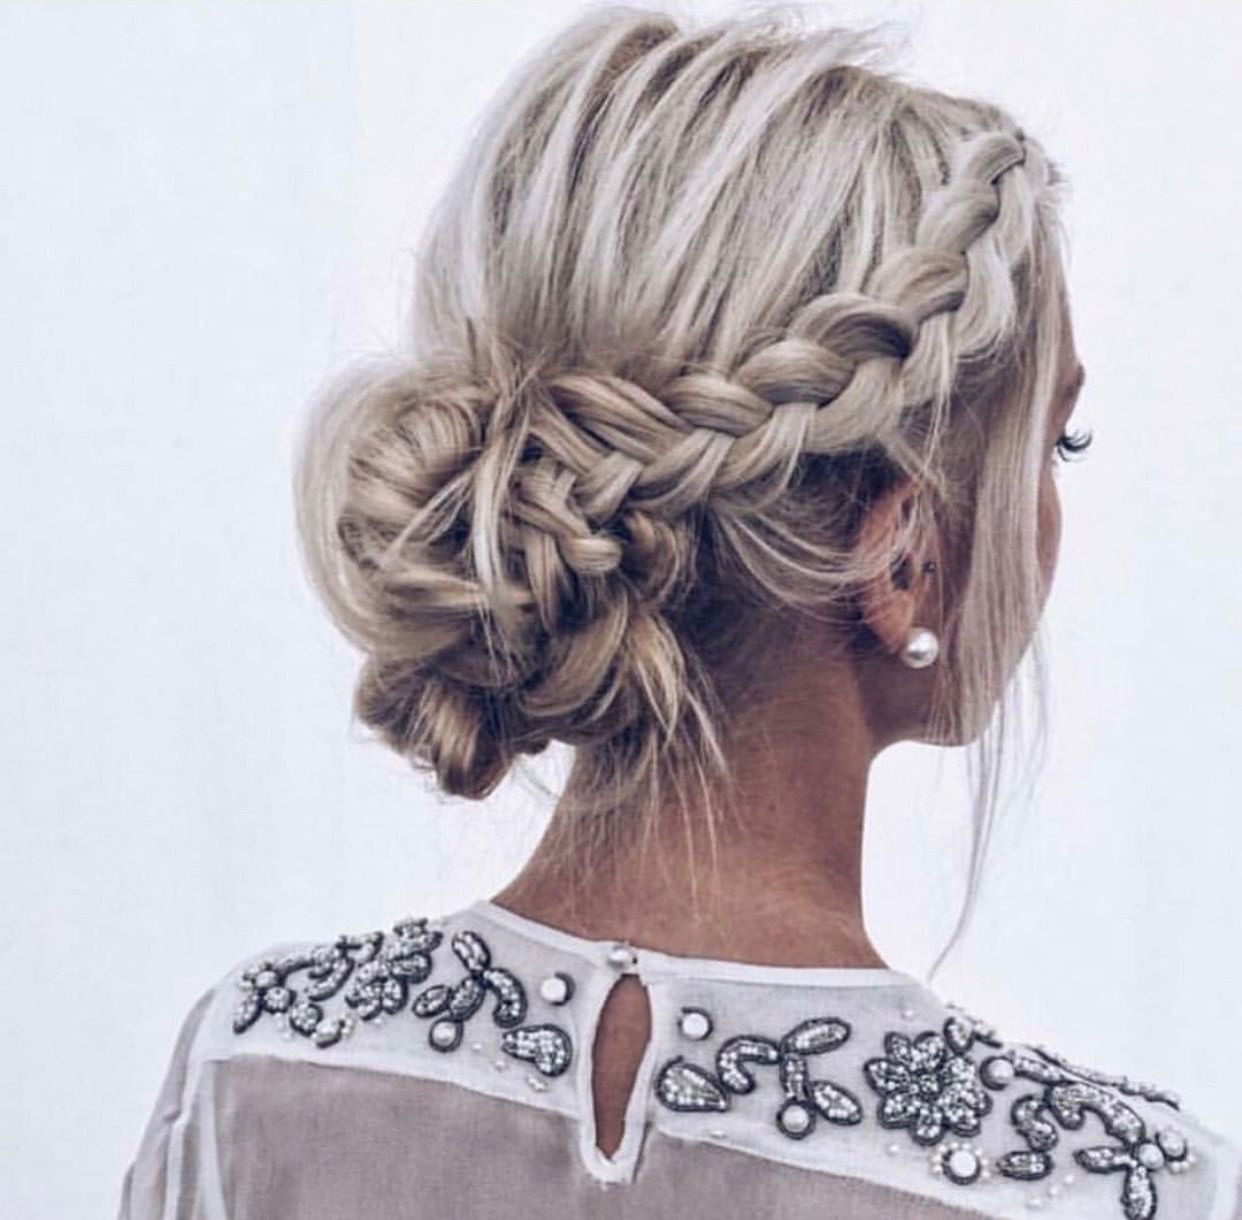 The Perfect Braided Updo: Teased, Messy Side Braid Fading For Recent Plaited Low Bun Braid Hairstyles (View 2 of 20)